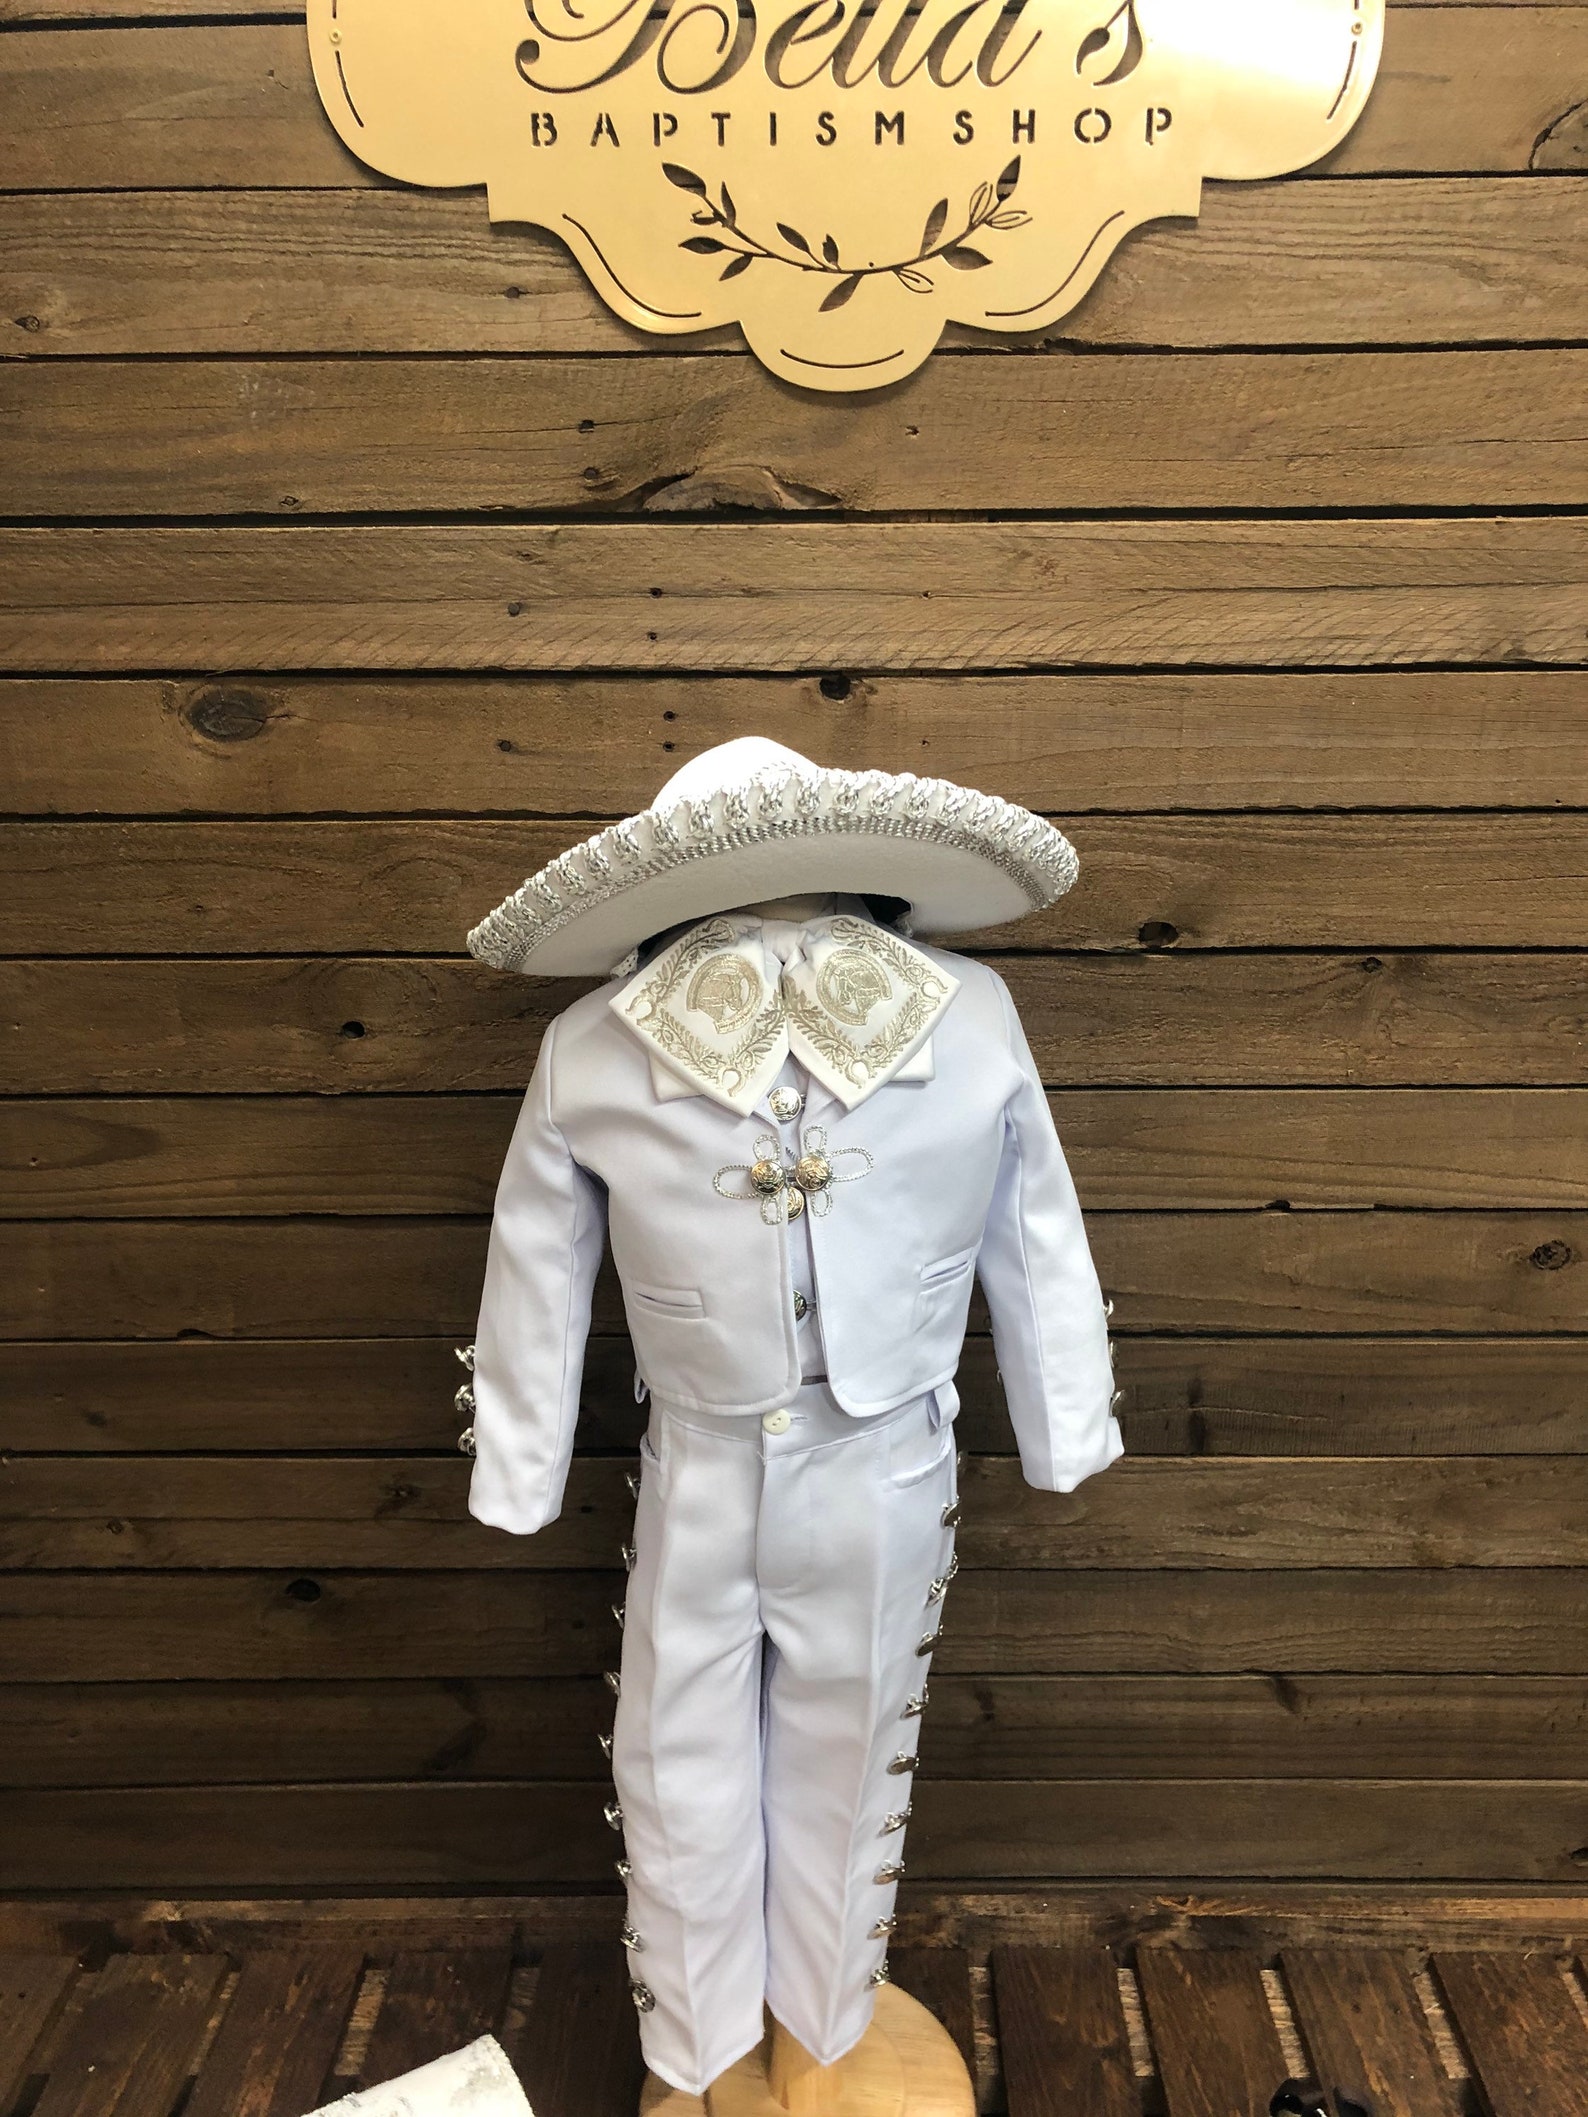 7 piece Boy charro outfit Baptism Charro outfit charro Baptism | Etsy